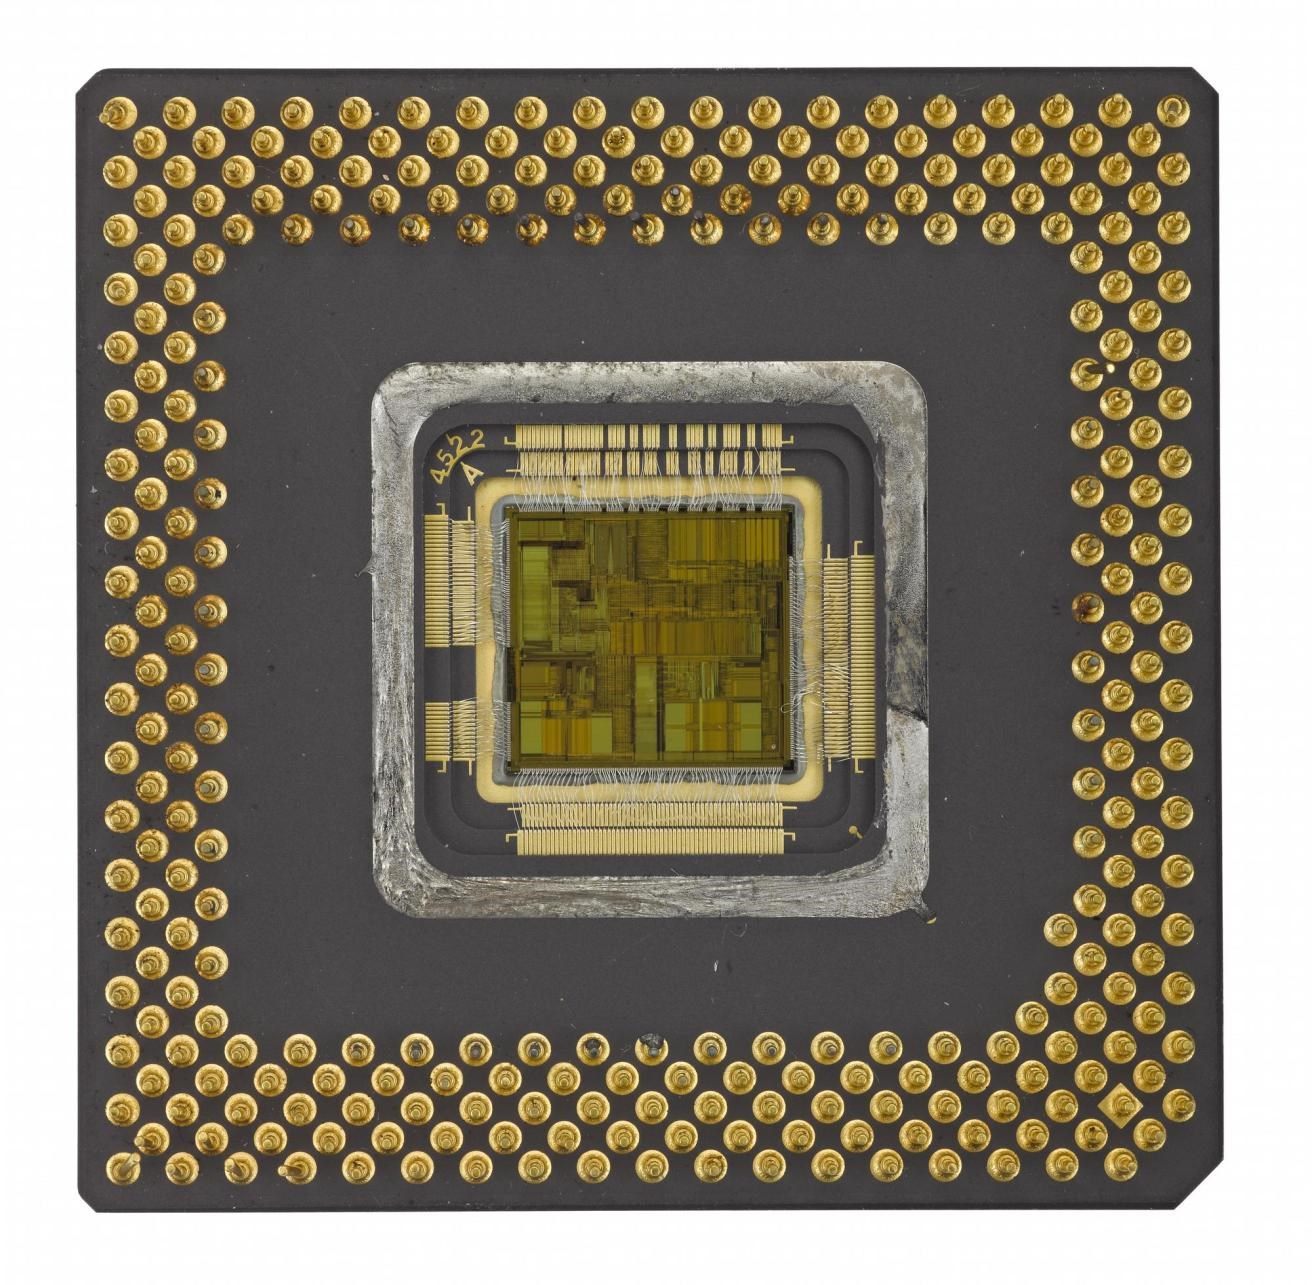 Ceramic is used to make this 1994 Intel Pentium microprocessor, which contains 3,200,000 transistors.